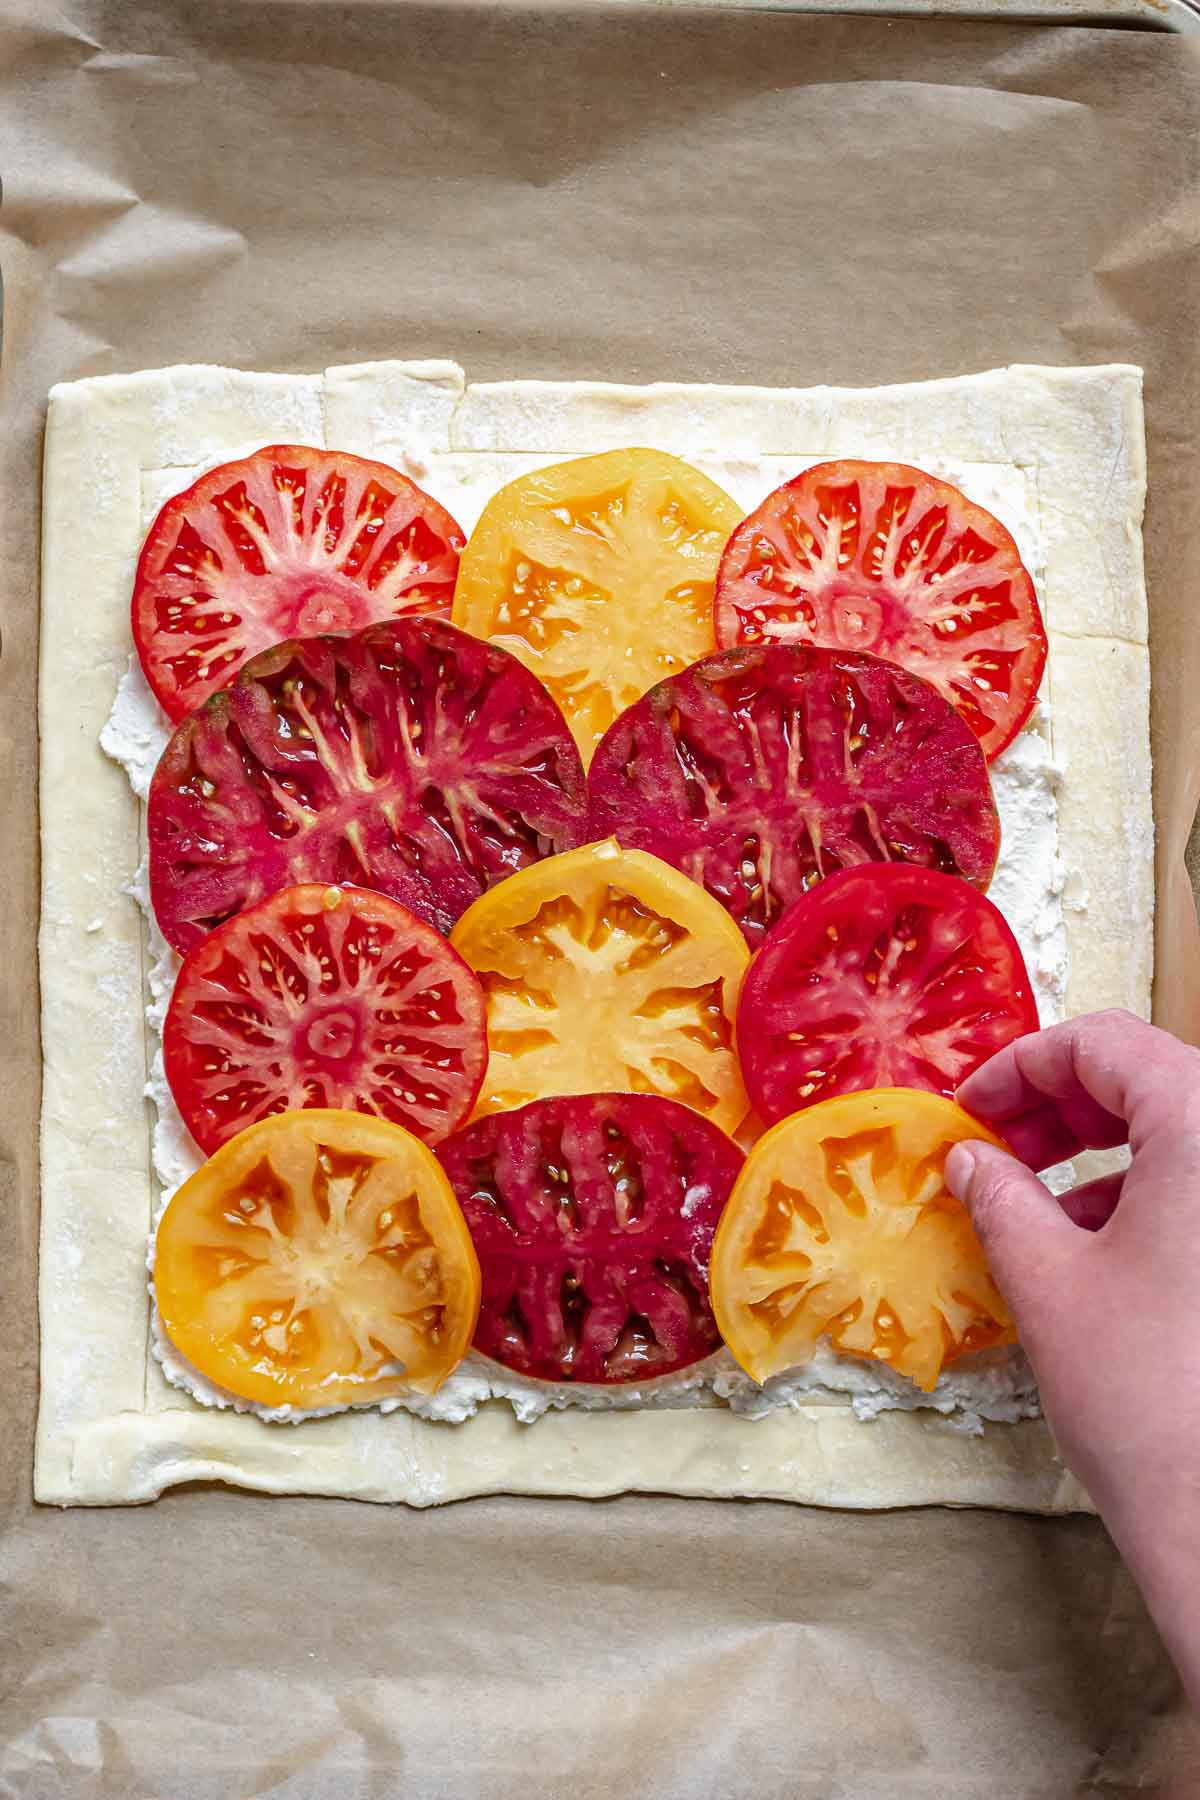 A hand adds sliced tomatoes on top of the cheese.